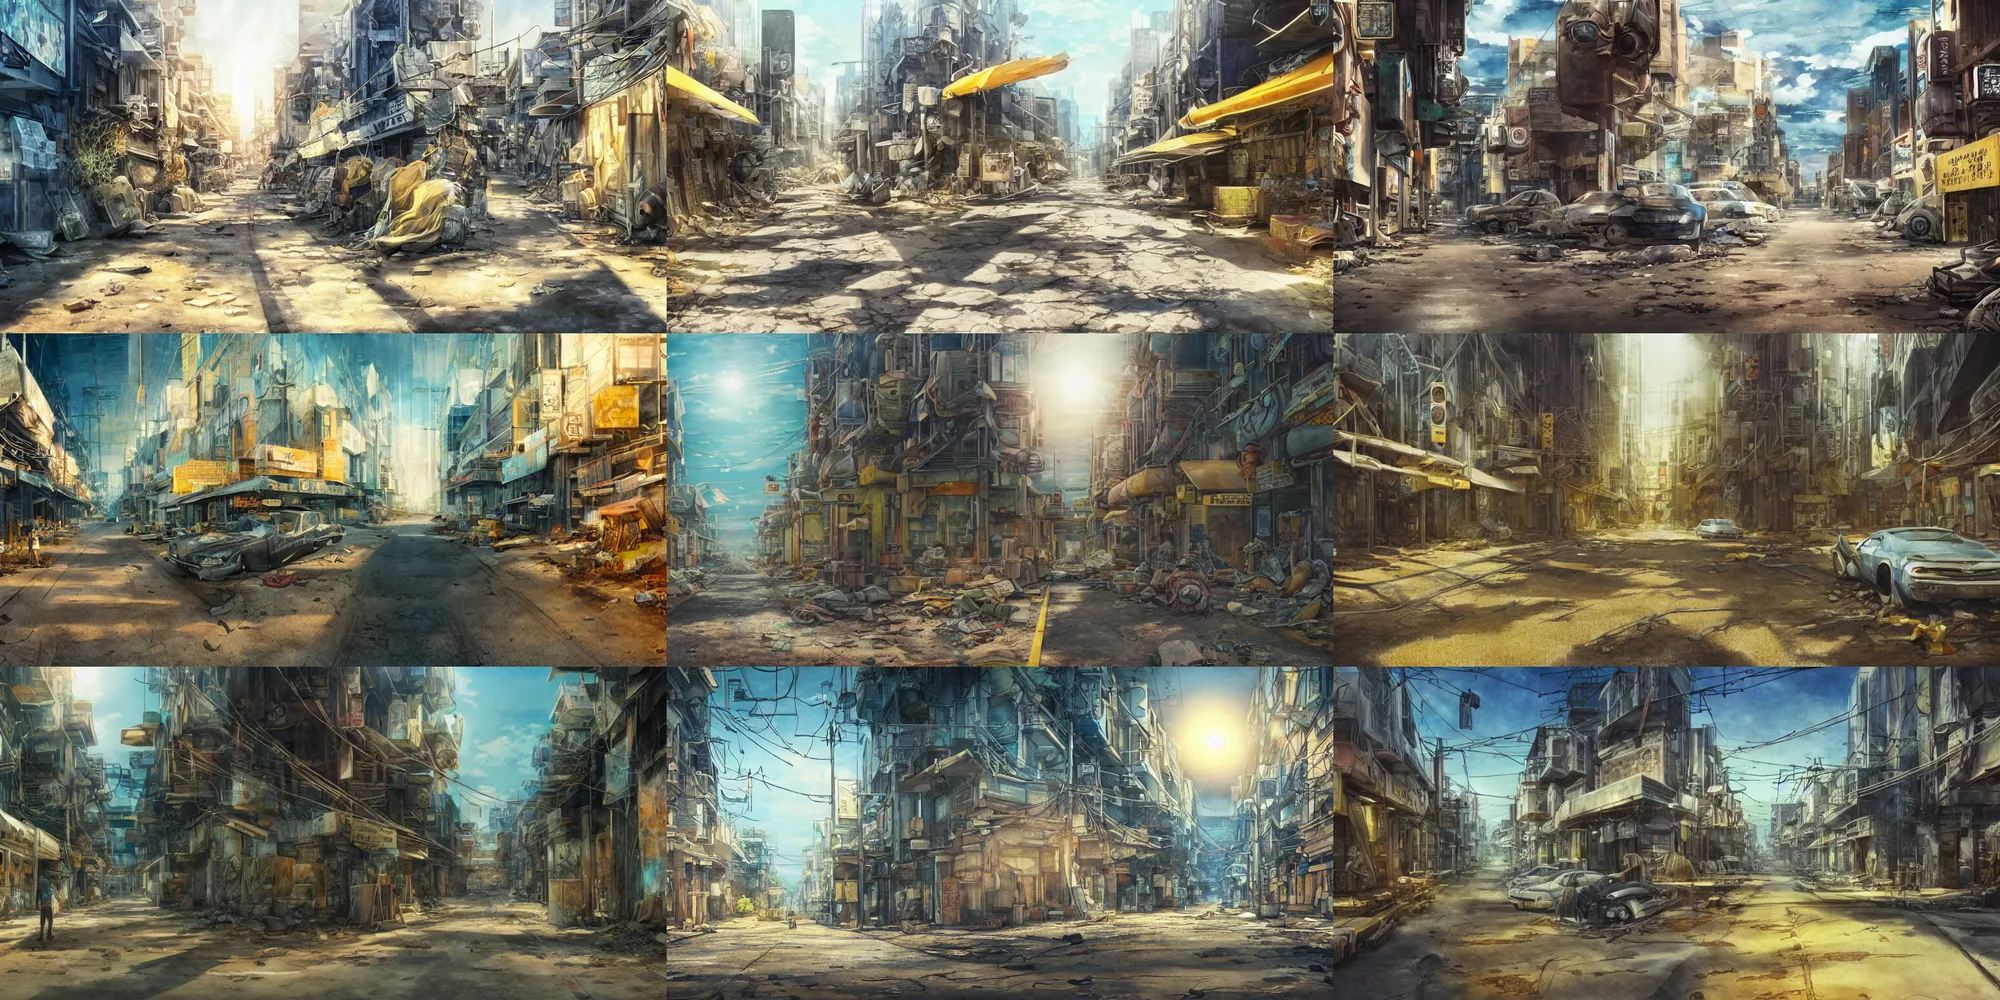 Prompt: incredible anime movie scene, vanishing point, explorer, watercolor, underwater market, empty road, coral, harsh bloom lighting, rim light, abandoned city, paper texture, movie scene, caustics shadows, deserted shinjuku junk town, old pawn shop, bright sun ground, wires, telephone pole, pipes, yellow dragon head